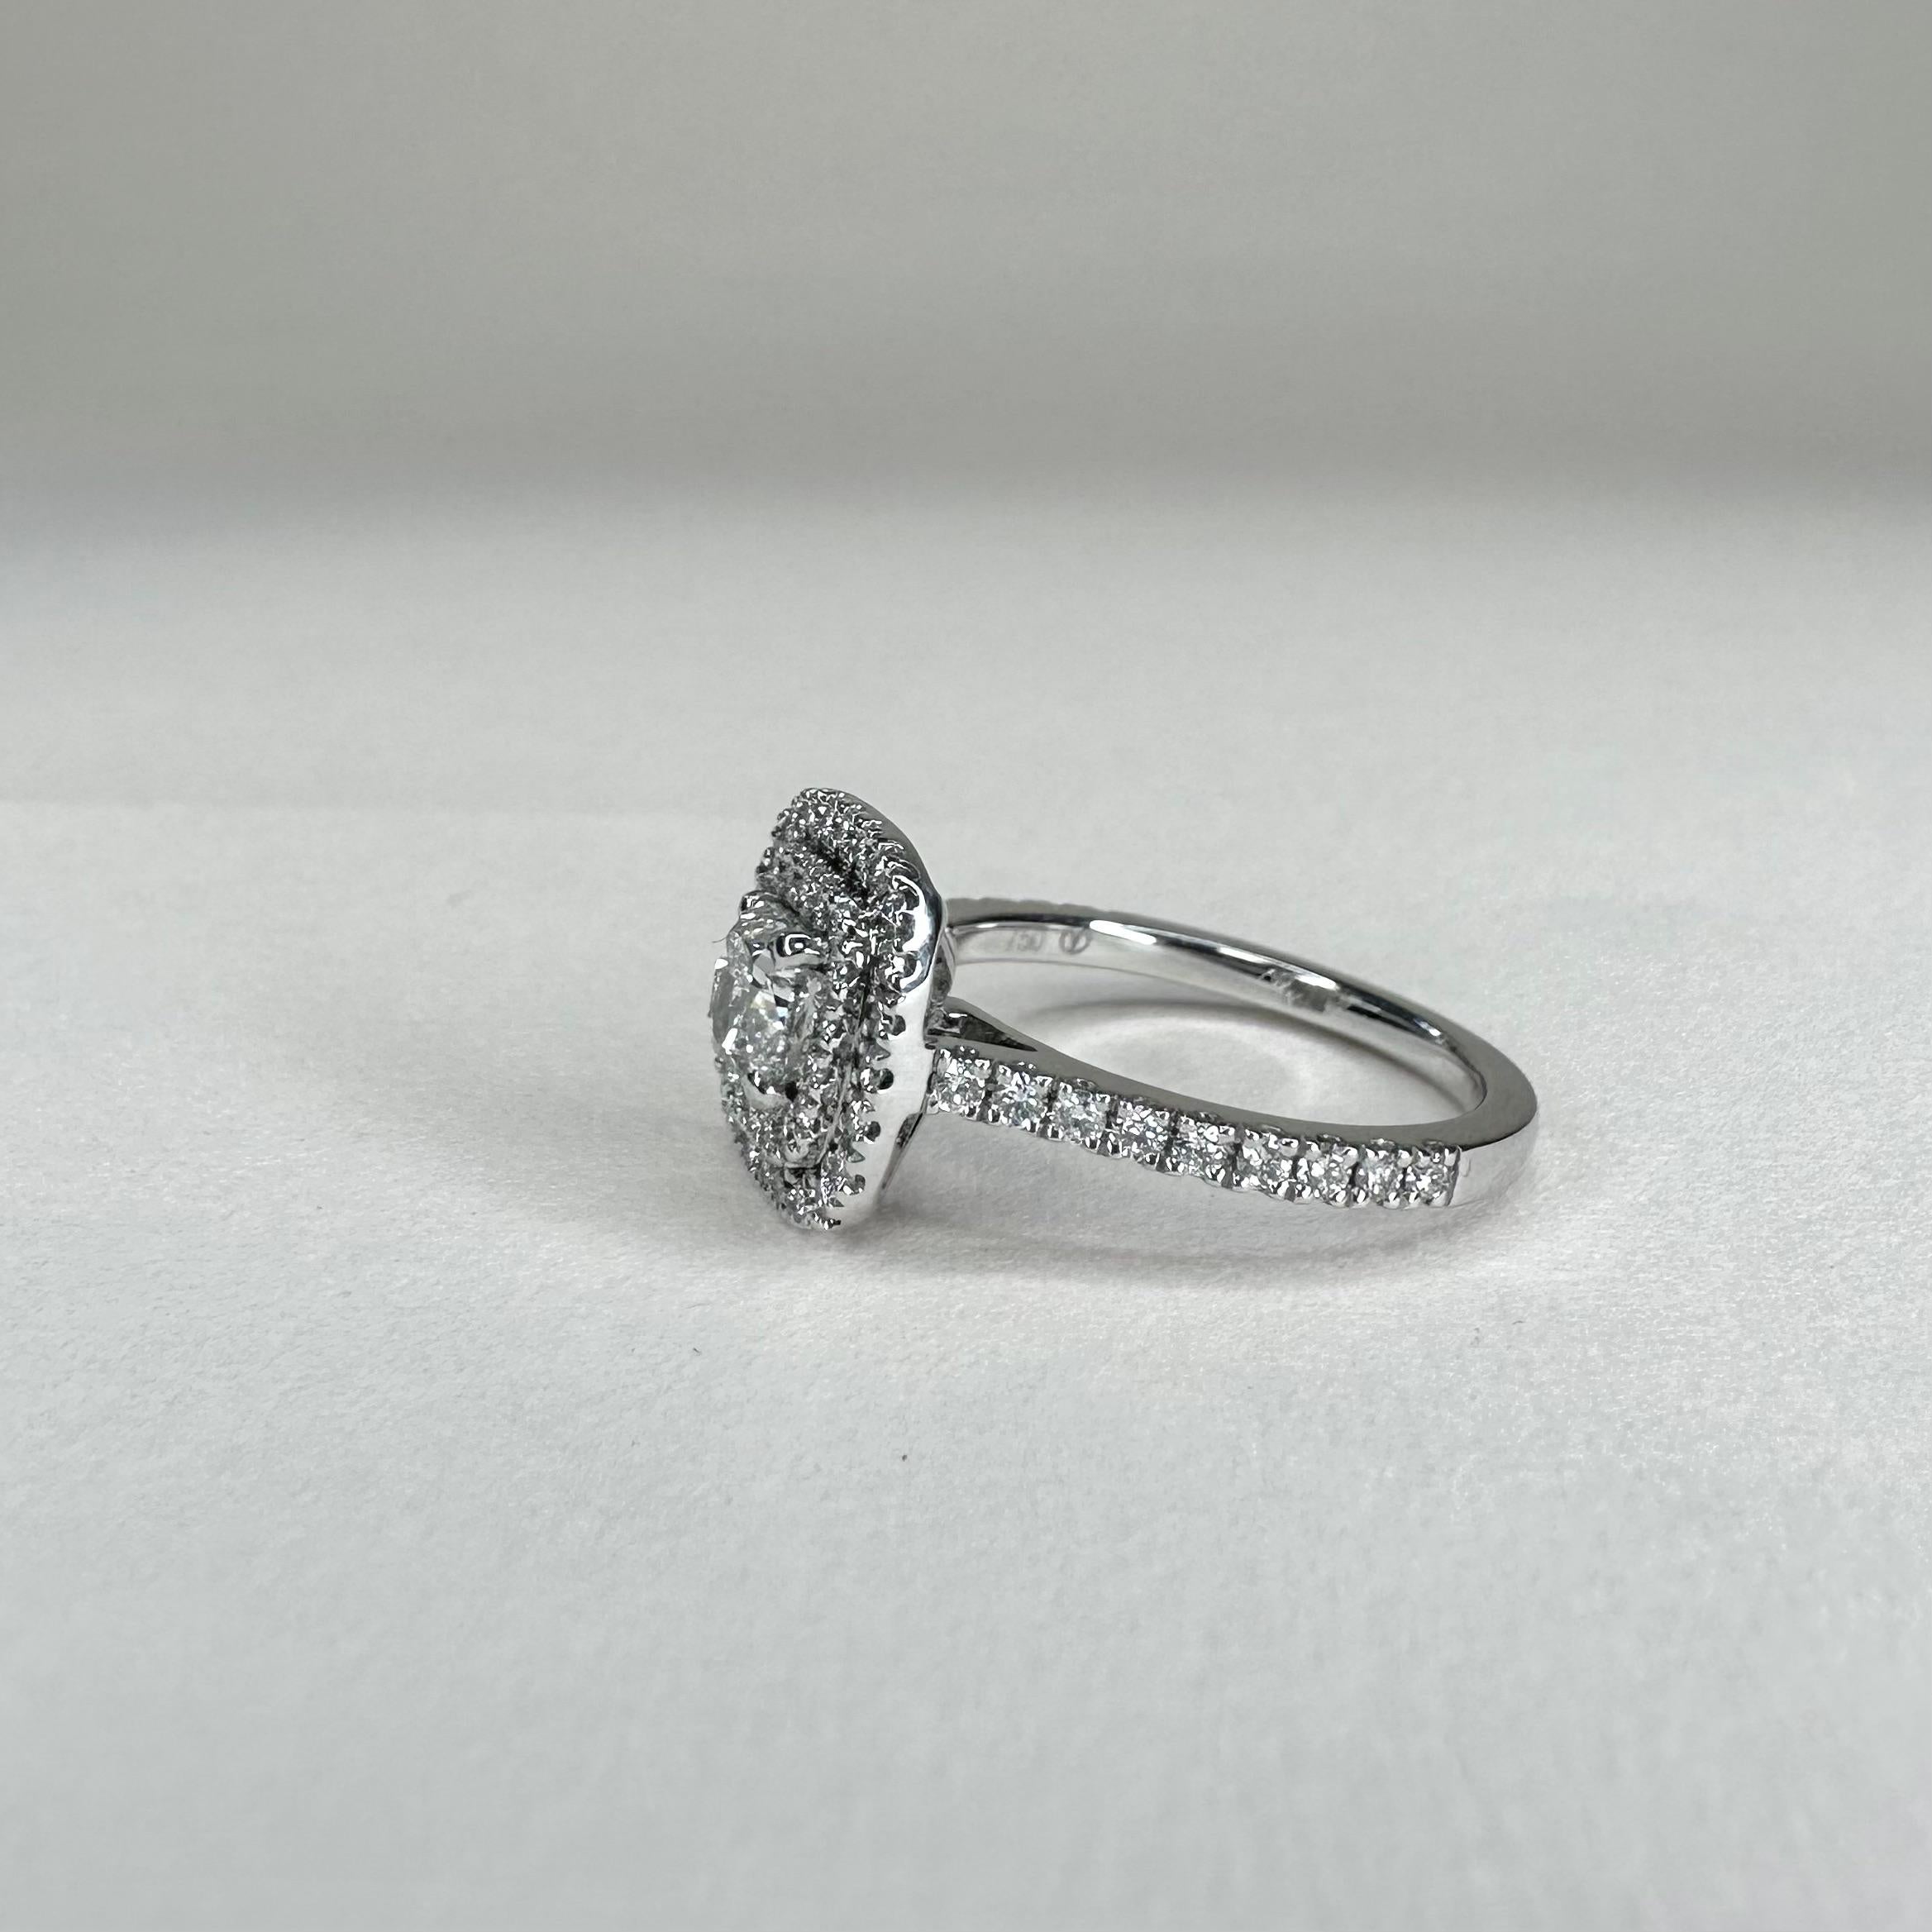 For Sale:  Art Deco Style 18k White Gold 0.70 Ct Diamond Ring GIA Certified with 0.55 Cts 6